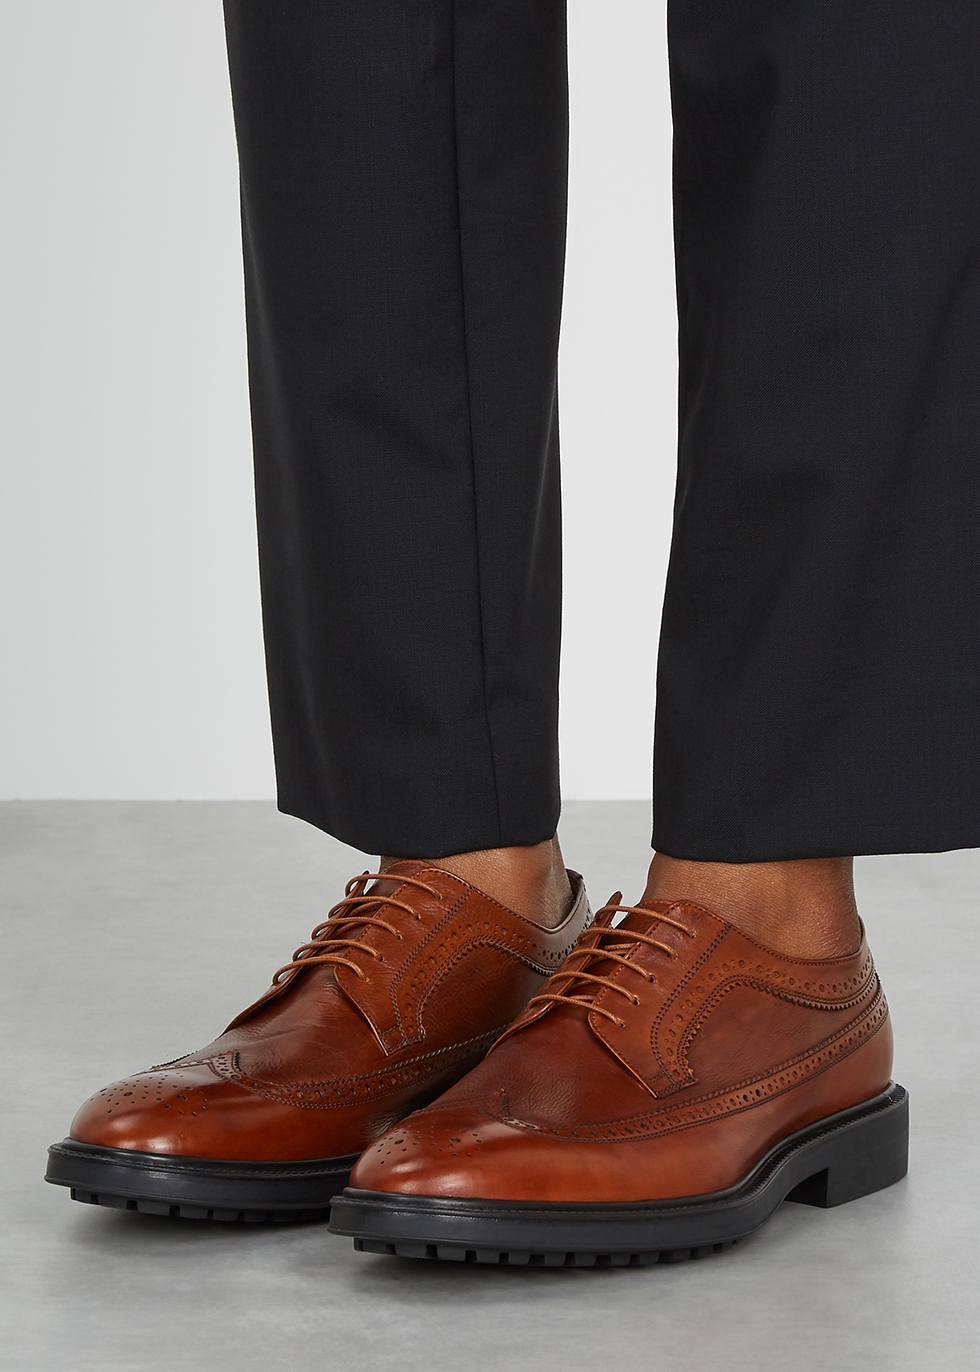 Paul Smith Gustav brown leather brogues 